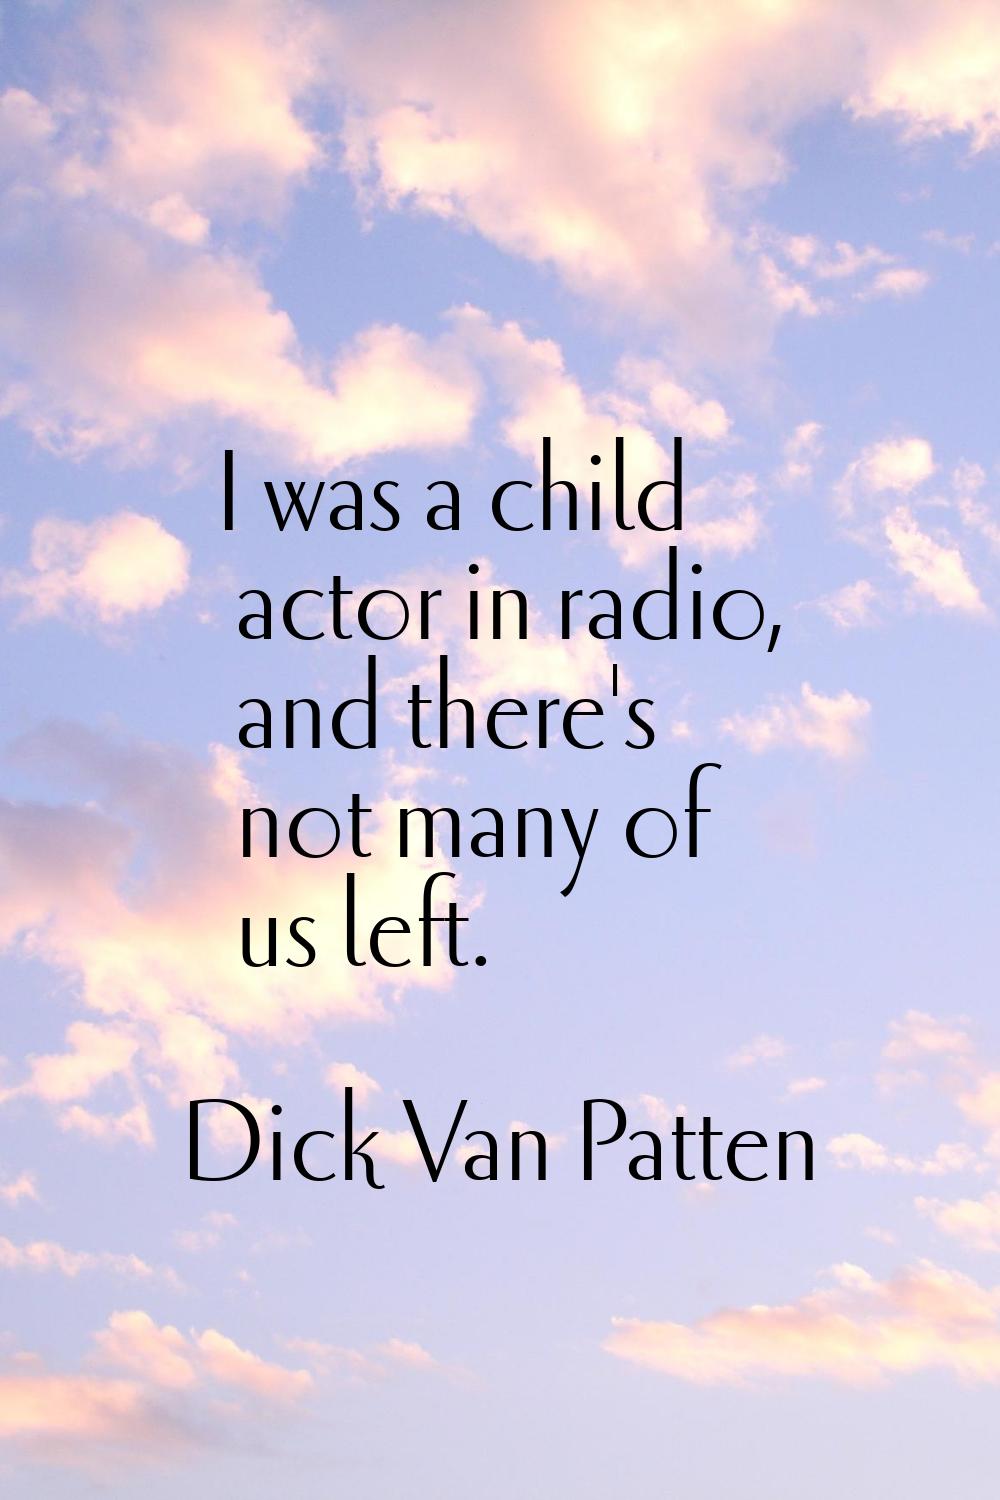 I was a child actor in radio, and there's not many of us left.